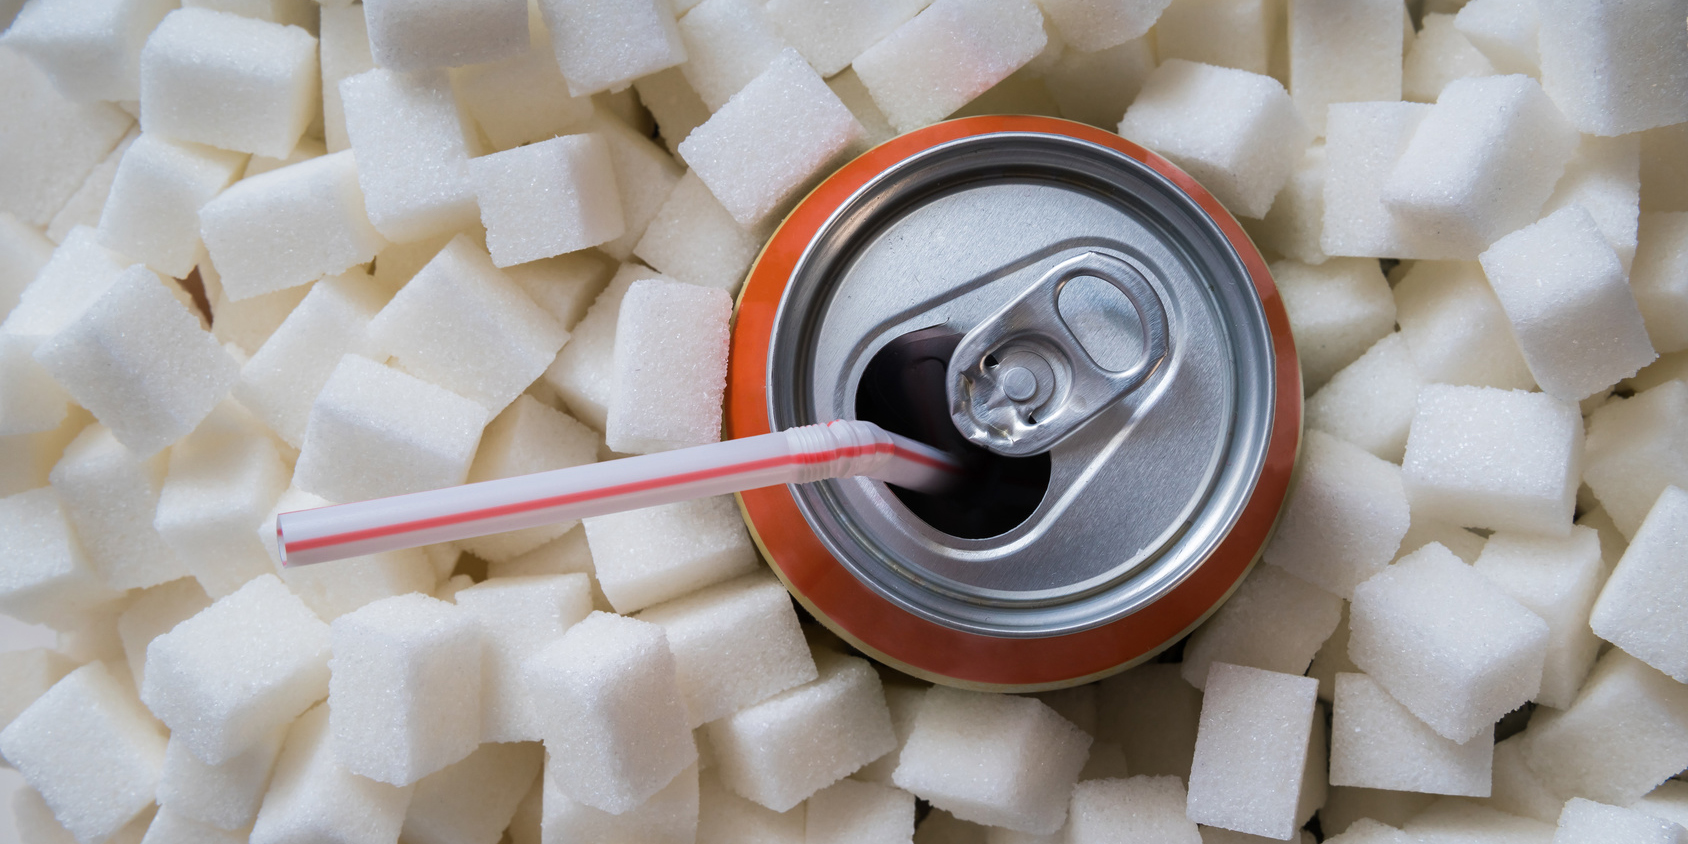 How to Spot Artificial Sweeteners Hiding in Your Food